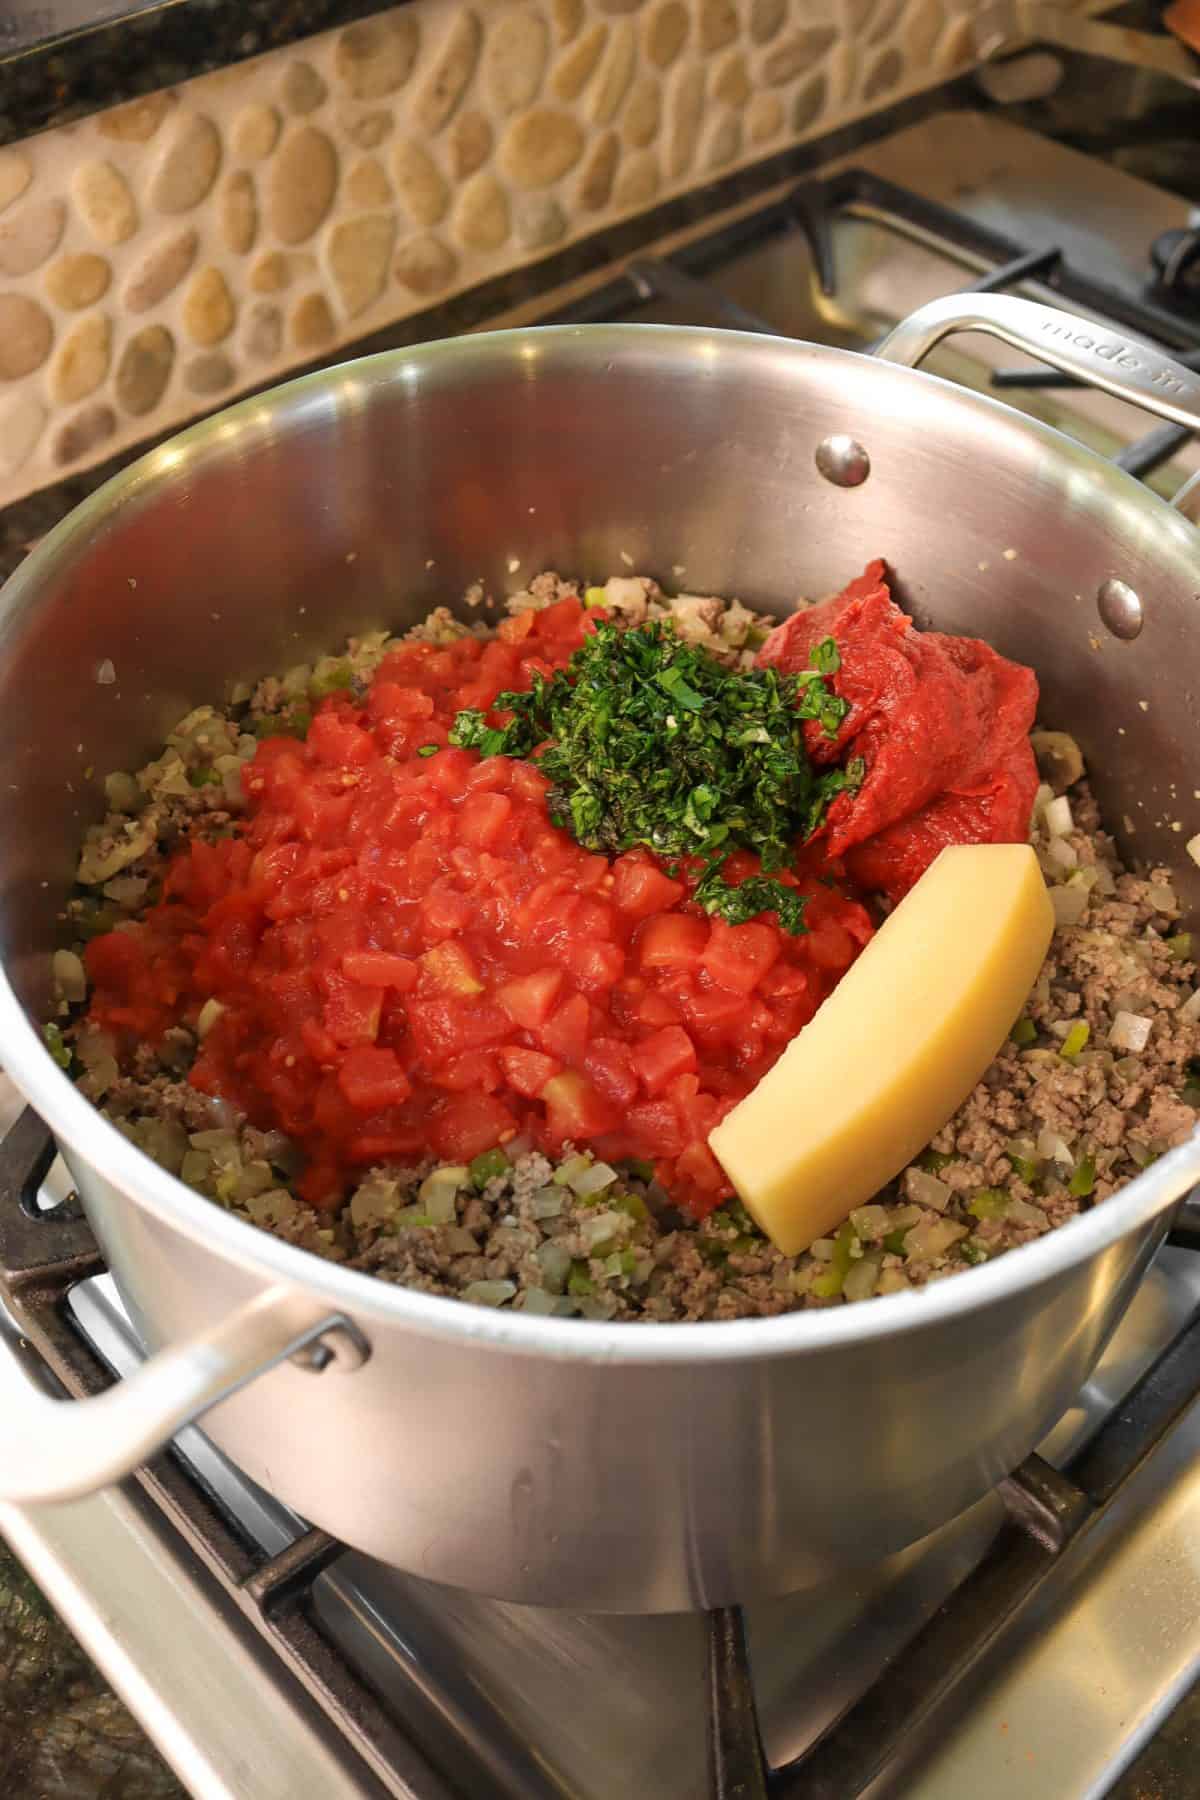 parmesan rind, tomatoes, and herbs added to ground beeef mixture